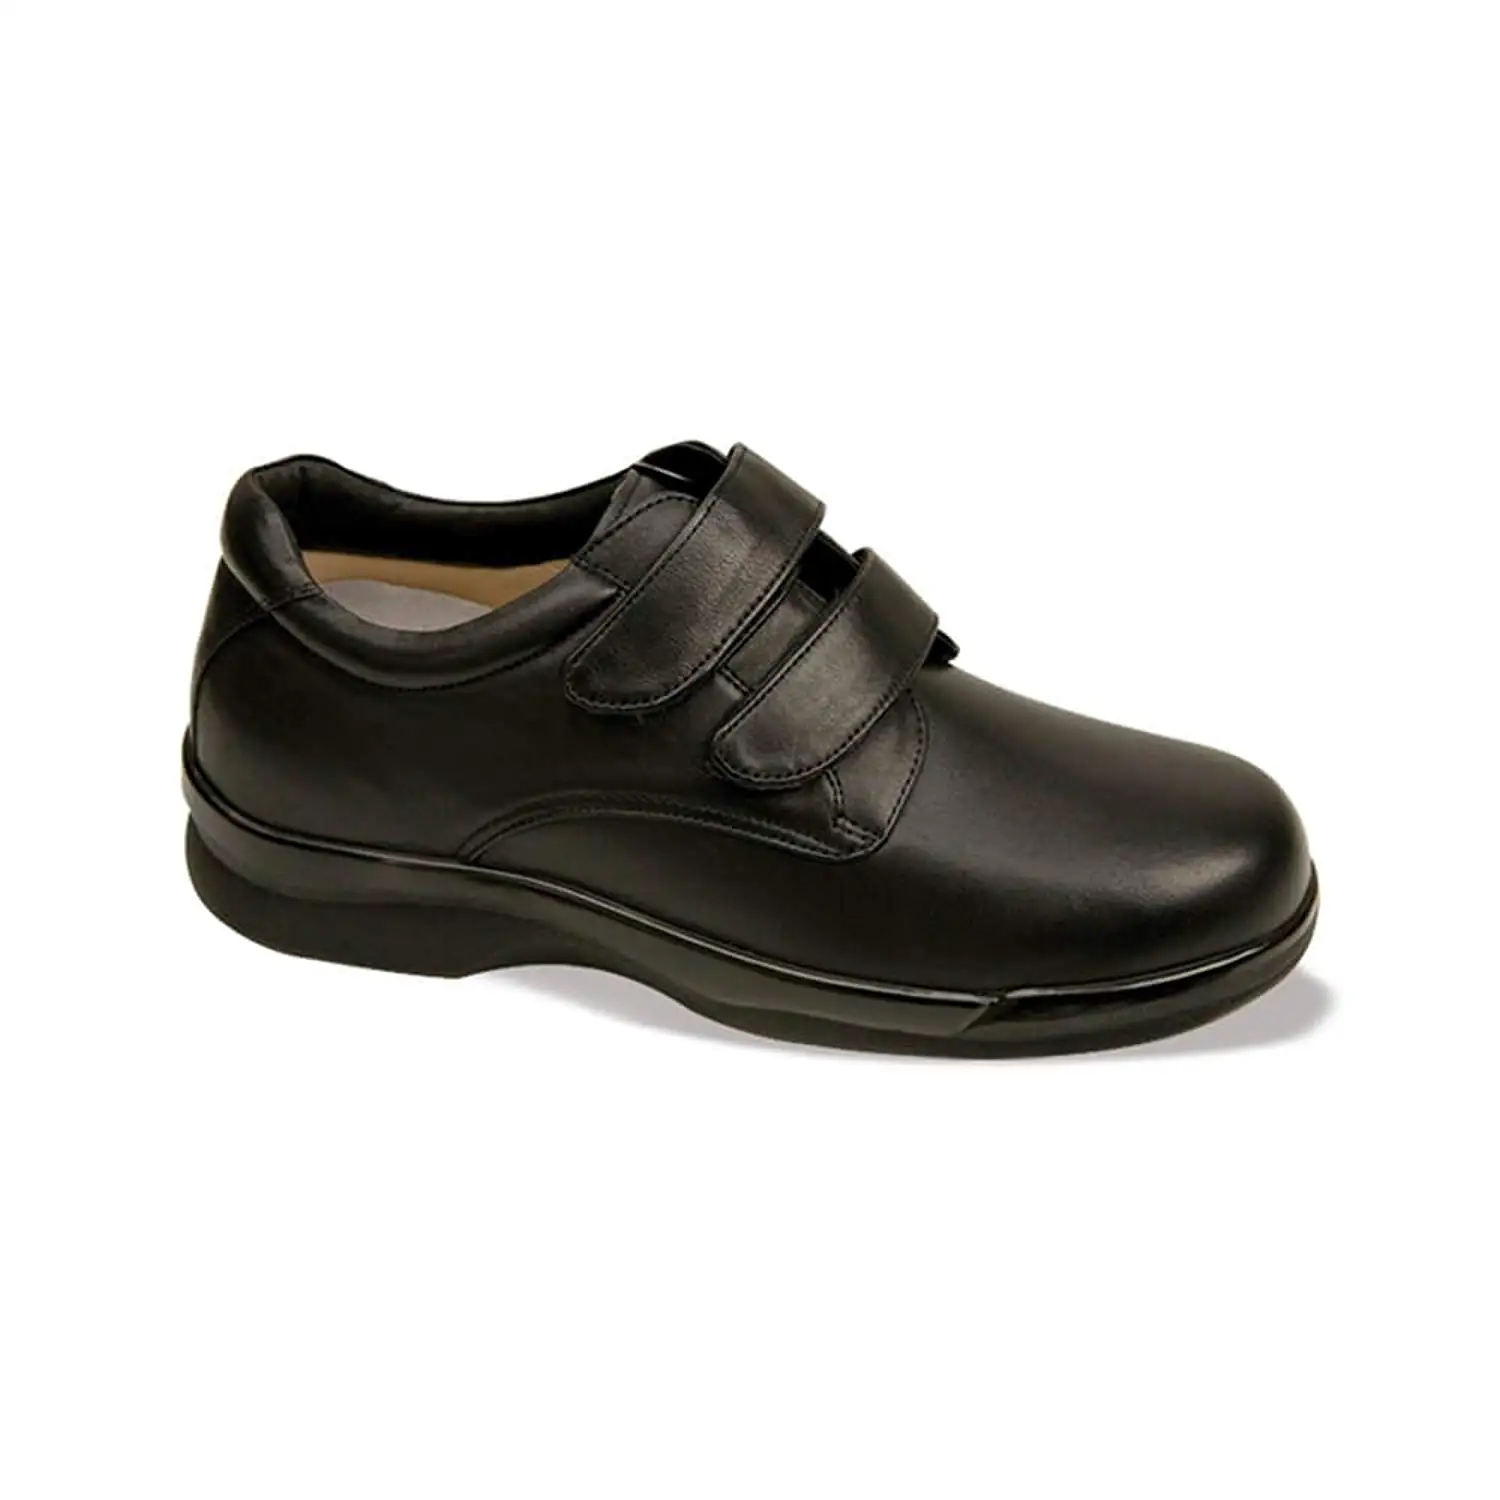 Cheap Walking Shoes With Velcro, find Walking Shoes With Velcro deals ...